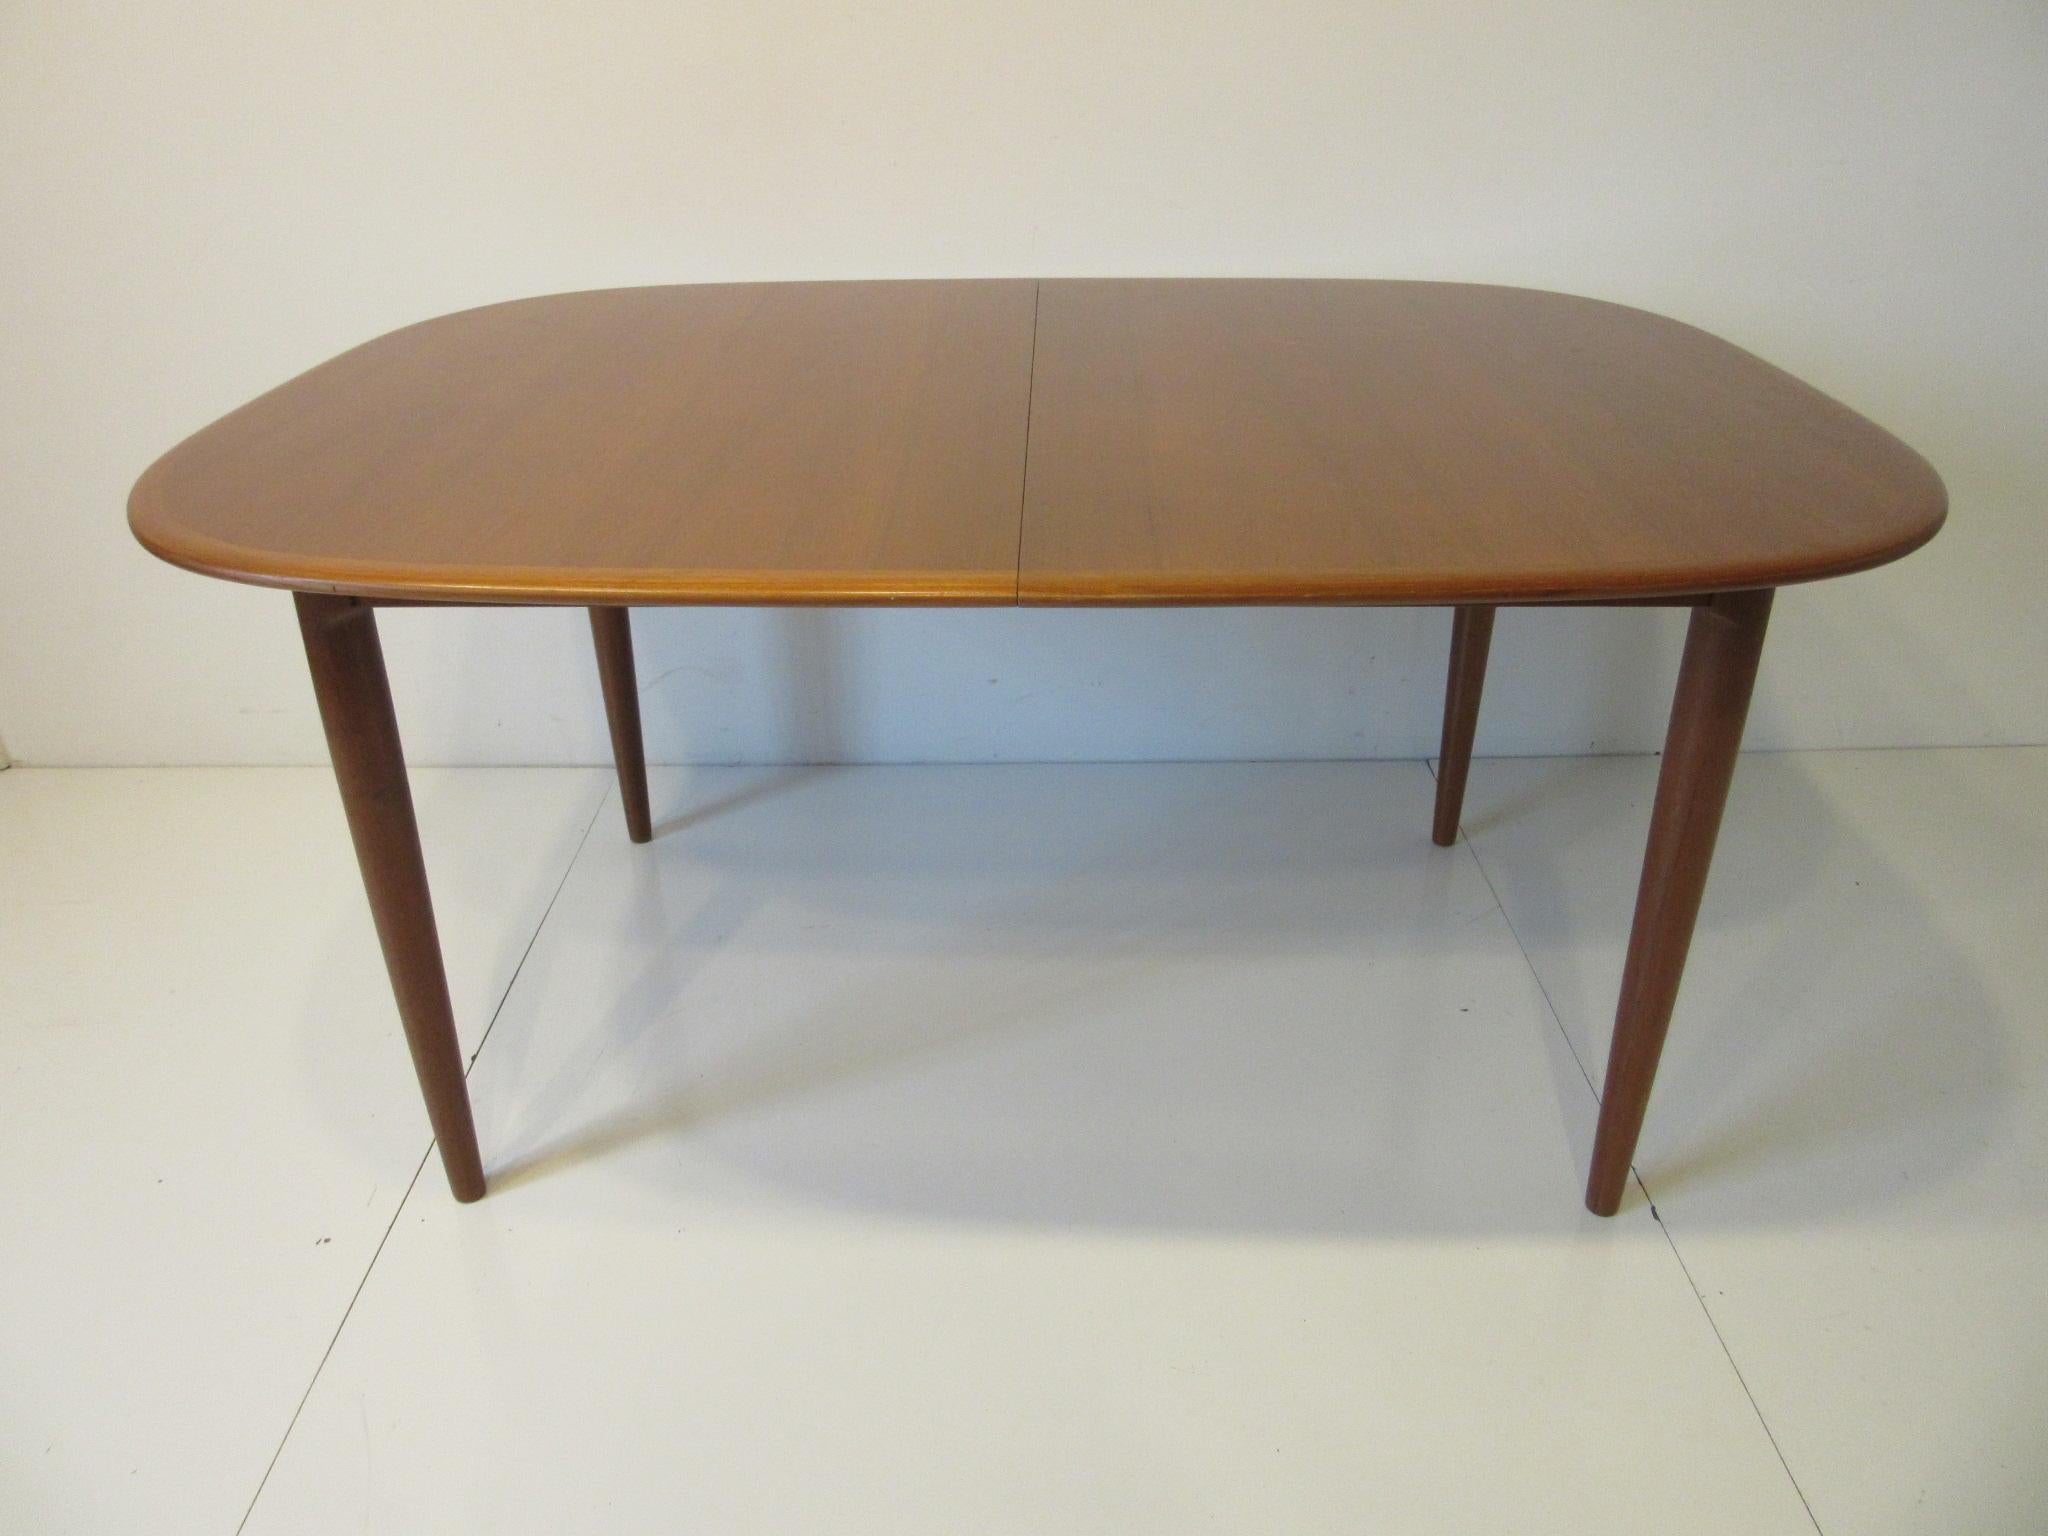 A well constructed and designed medium toned teak wood dining table with two 18.75